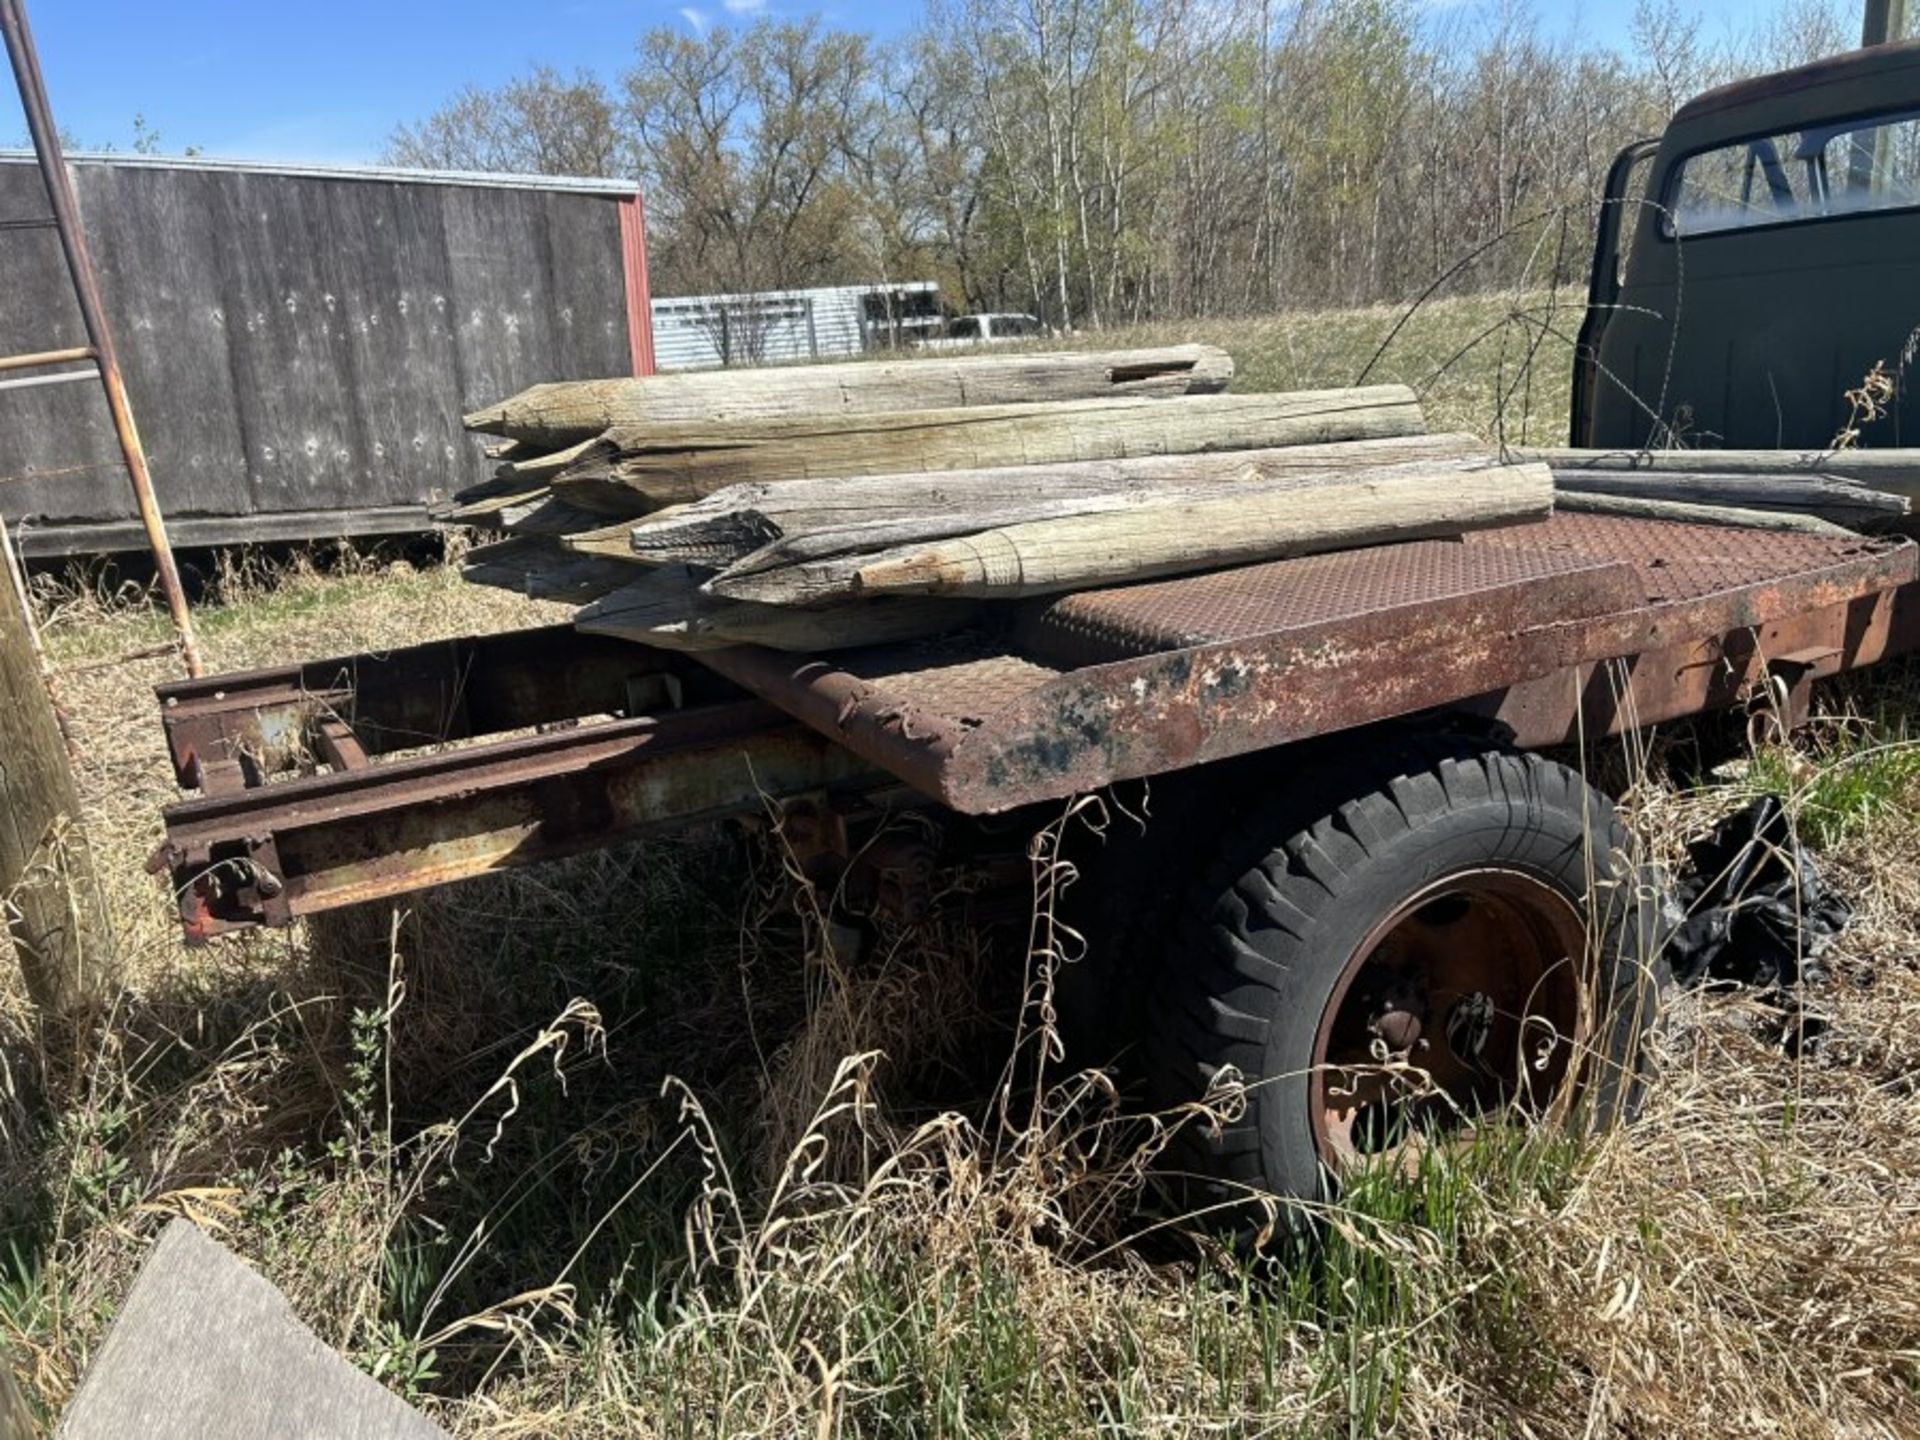 1956 FORD F600 CAB & CHASSIS W/STD TRANS, V8 ENG. (PROJECT) - LOCATED 22 KM EAST OF PONOKA - Image 3 of 7